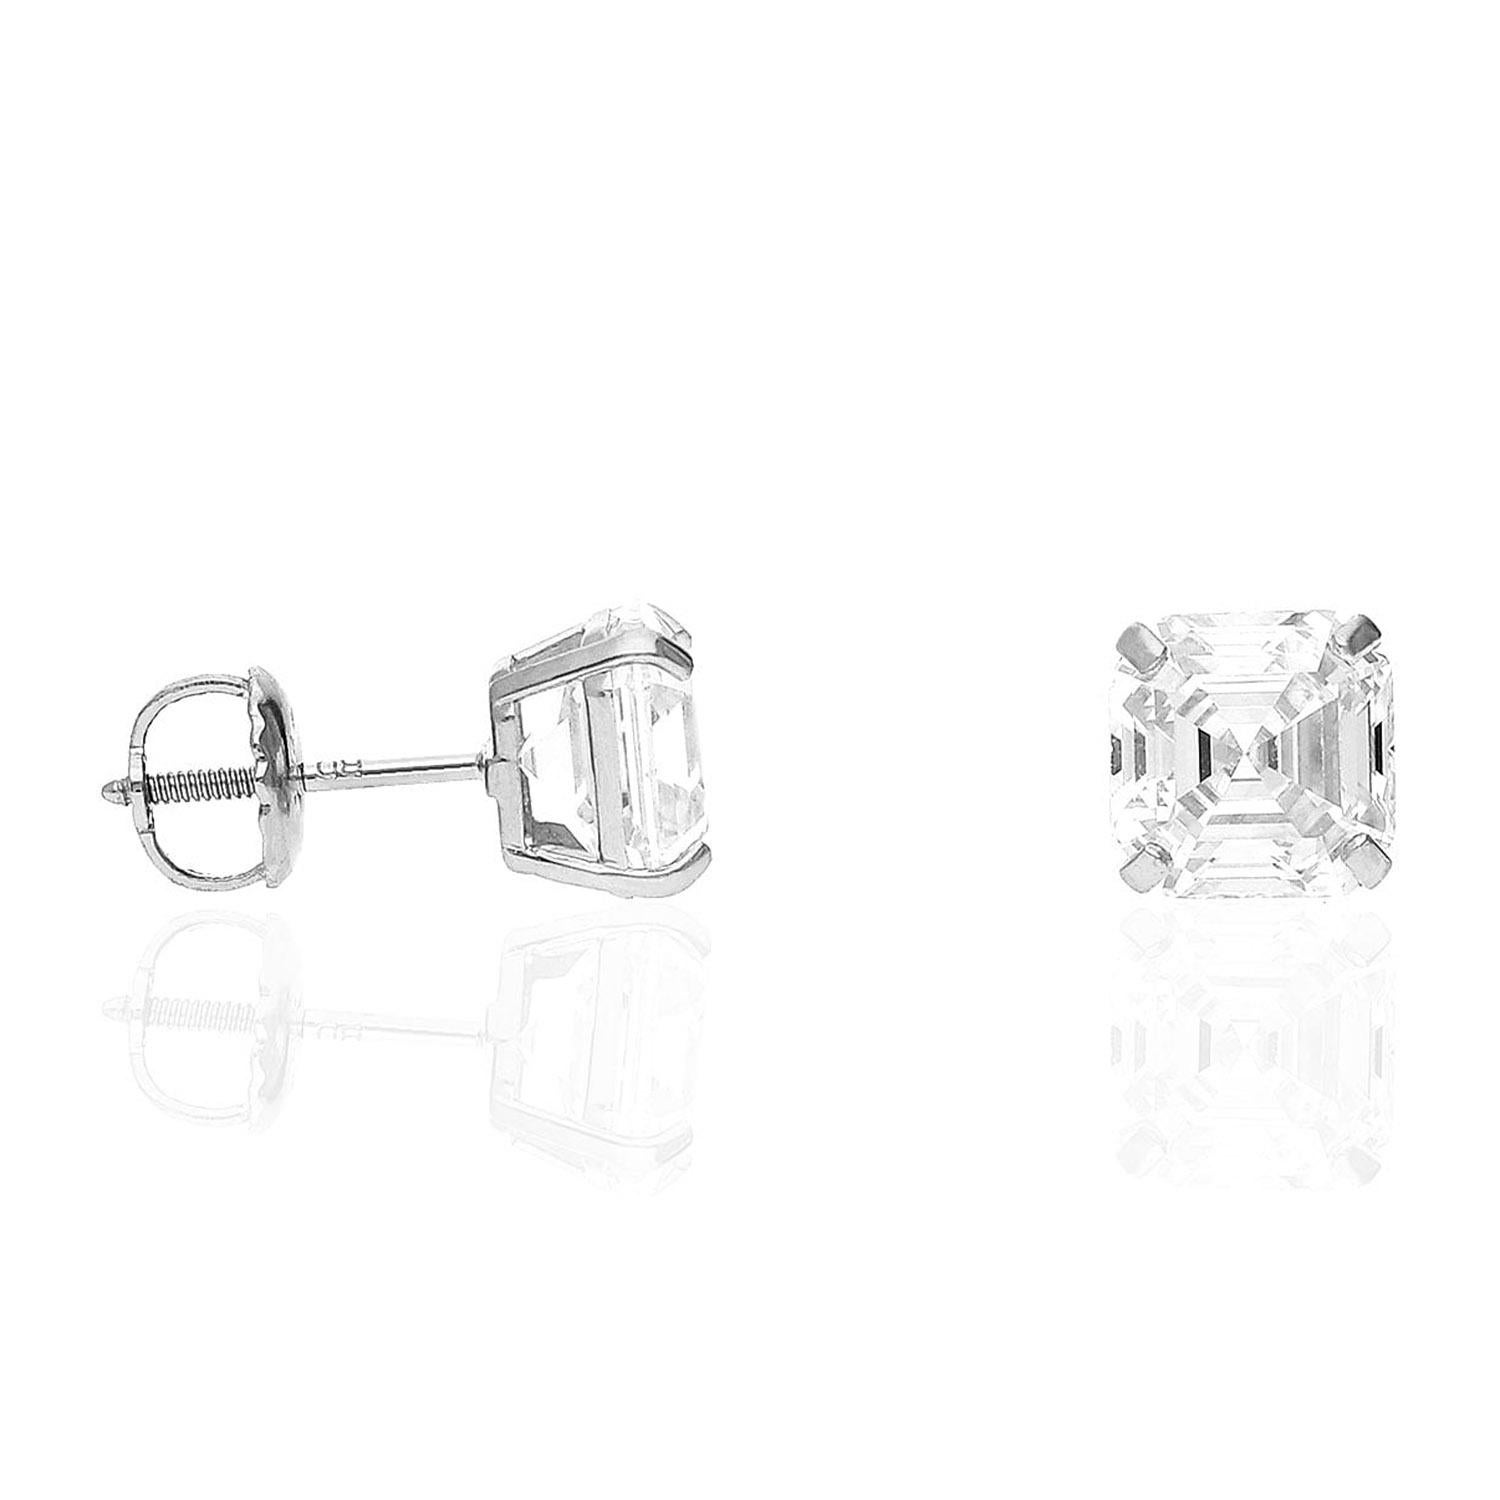  2ctw pair of asscher cut diamonds is gorgeously sophisticated and is exceptionally clean with VS1 clarity! The diamonds are graded F/He for color, and they face up with very minimal warmth. The very subtle hint of color is overwhelmed by the bright